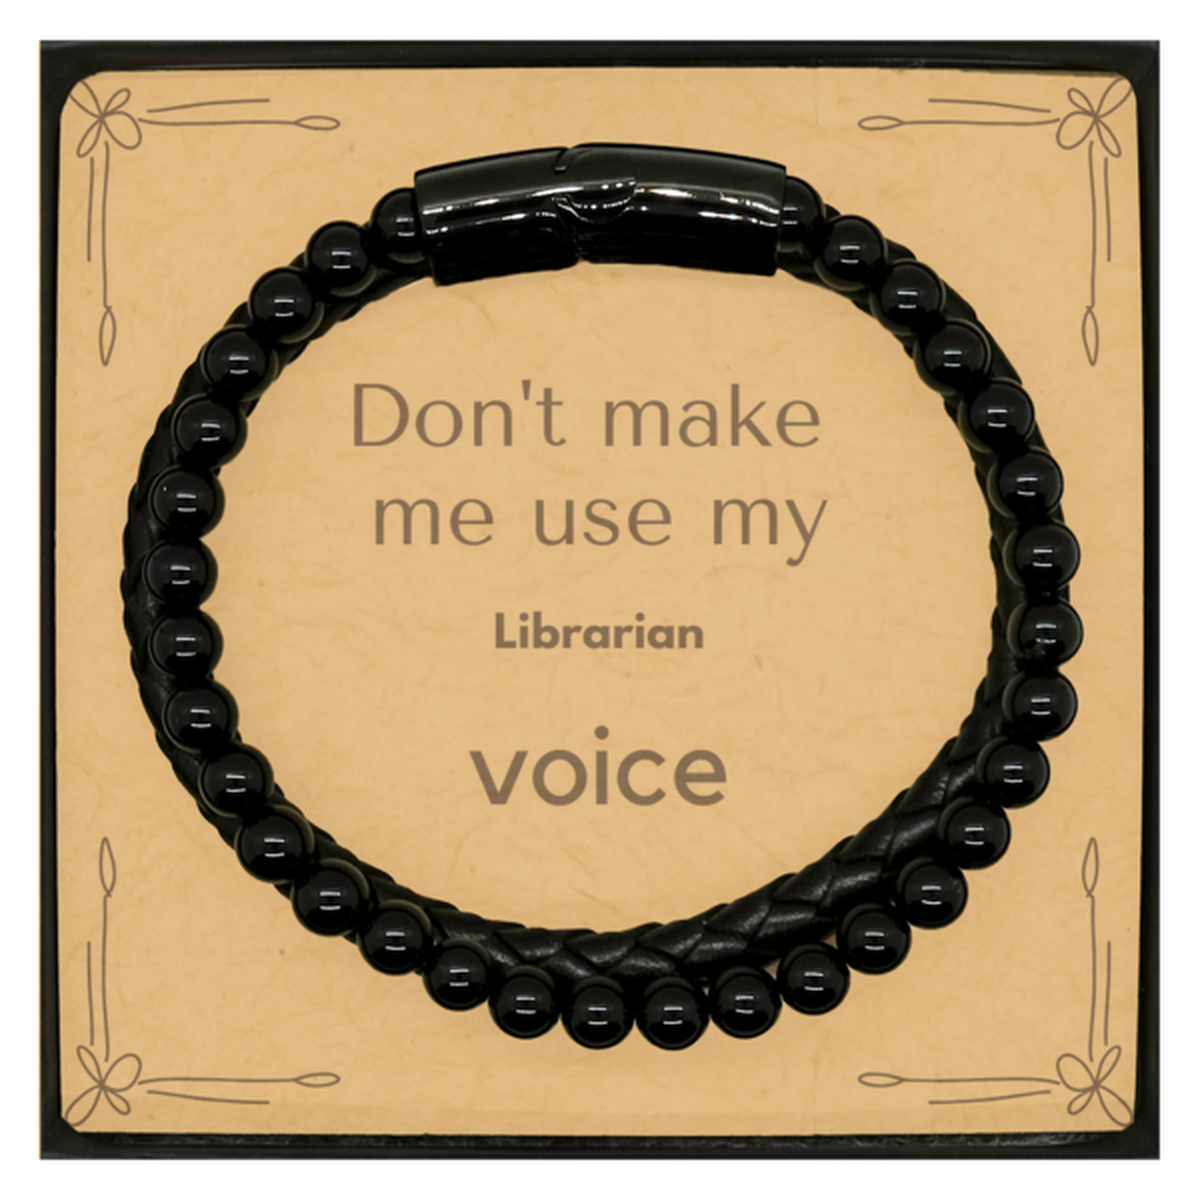 Don't make me use my Librarian voice, Sarcasm Librarian Card Gifts, Christmas Librarian Stone Leather Bracelets Birthday Unique Gifts For Librarian Coworkers, Men, Women, Colleague, Friends